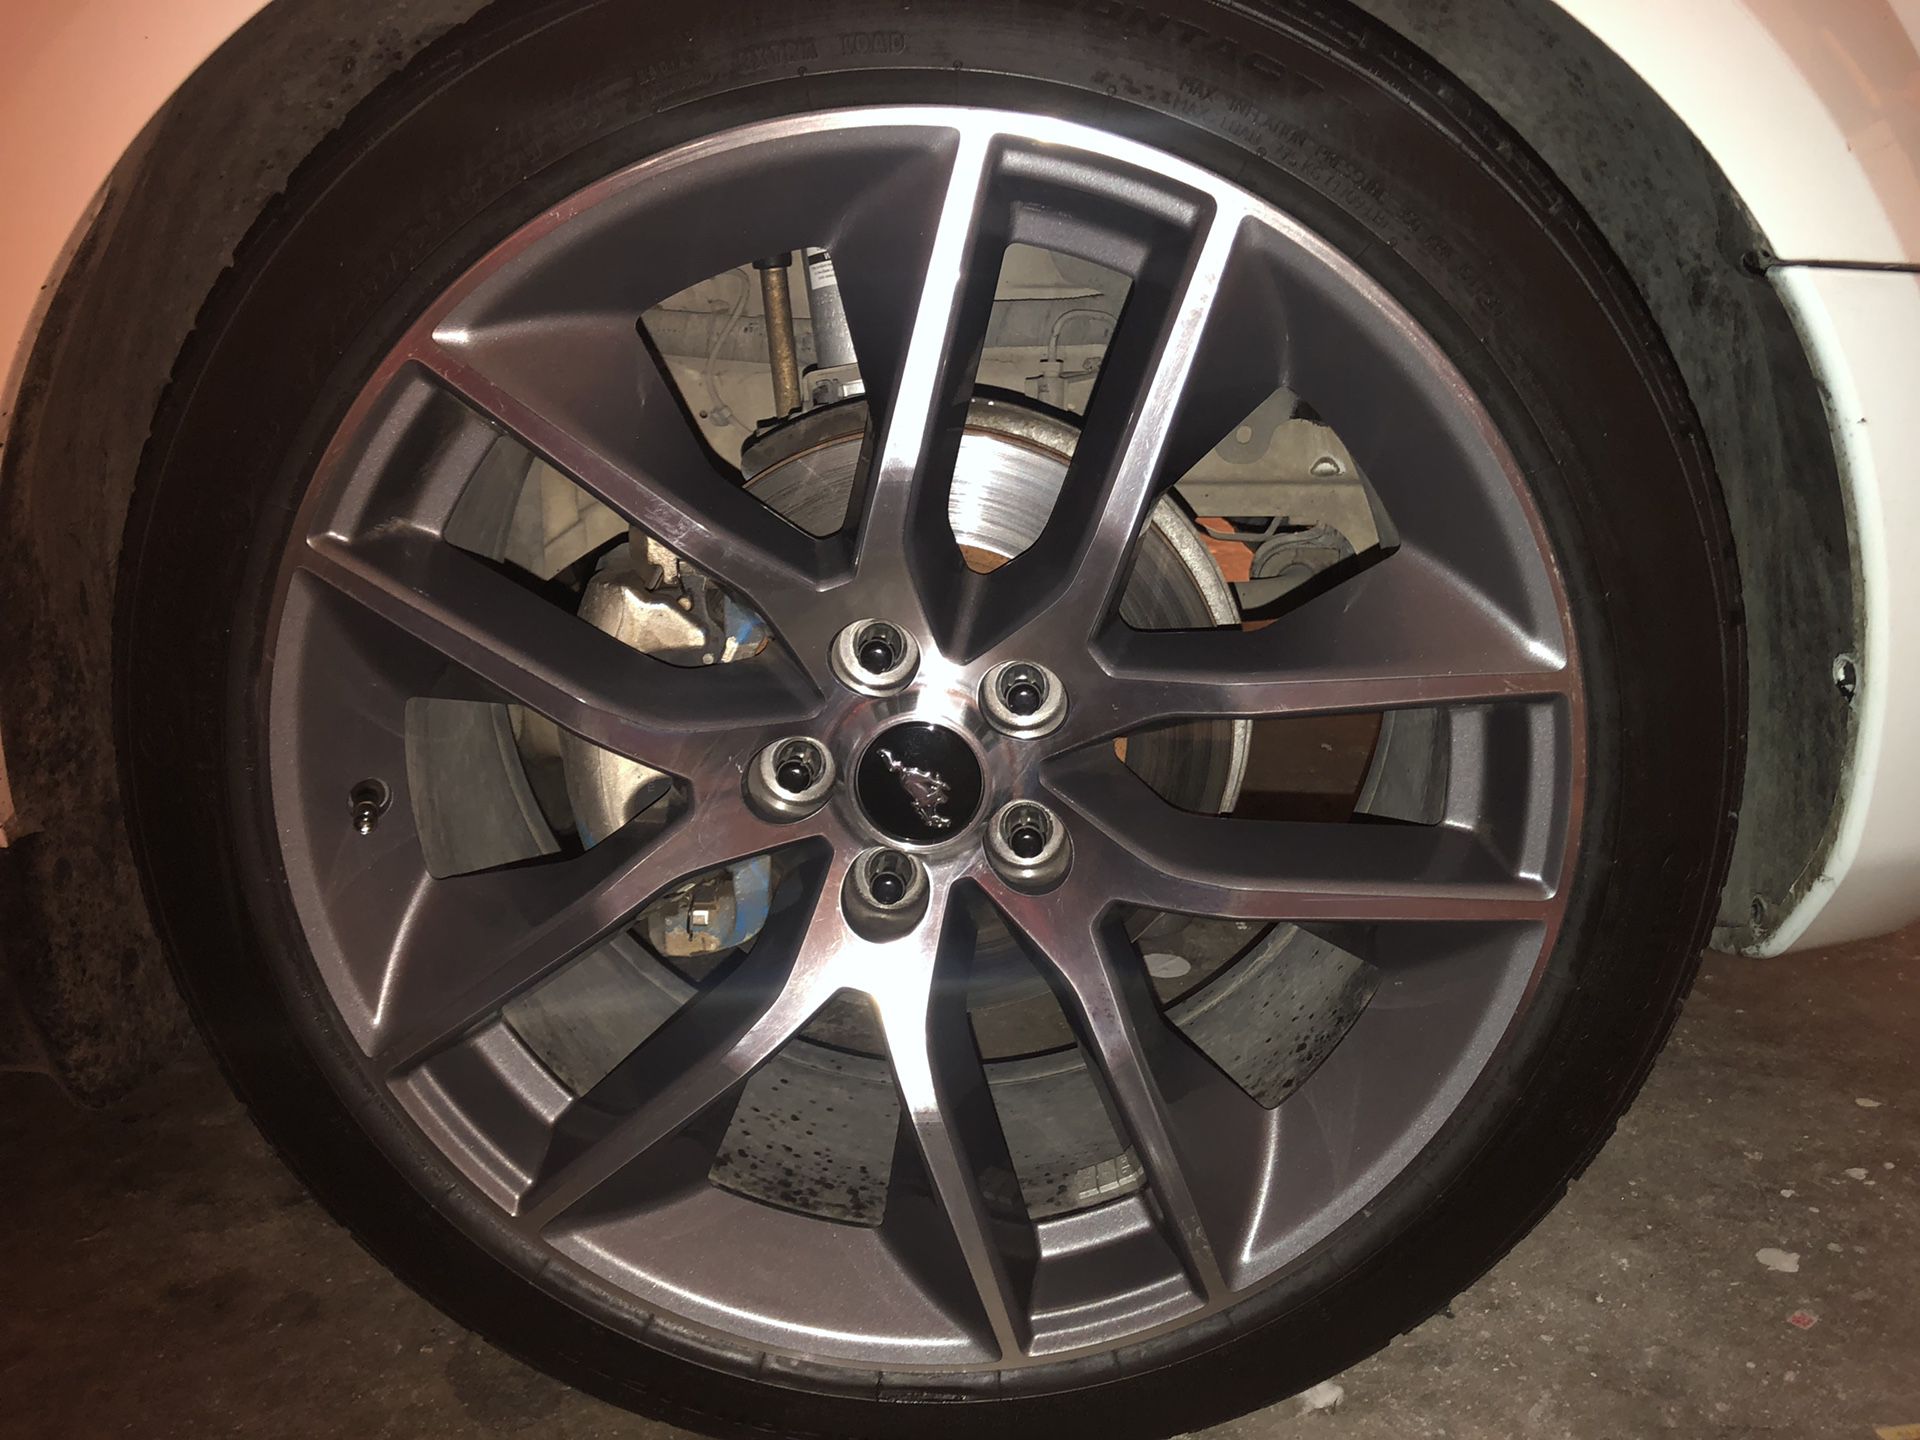 Looking to trade 20” mustang oem rims with continental tires. Super good tread